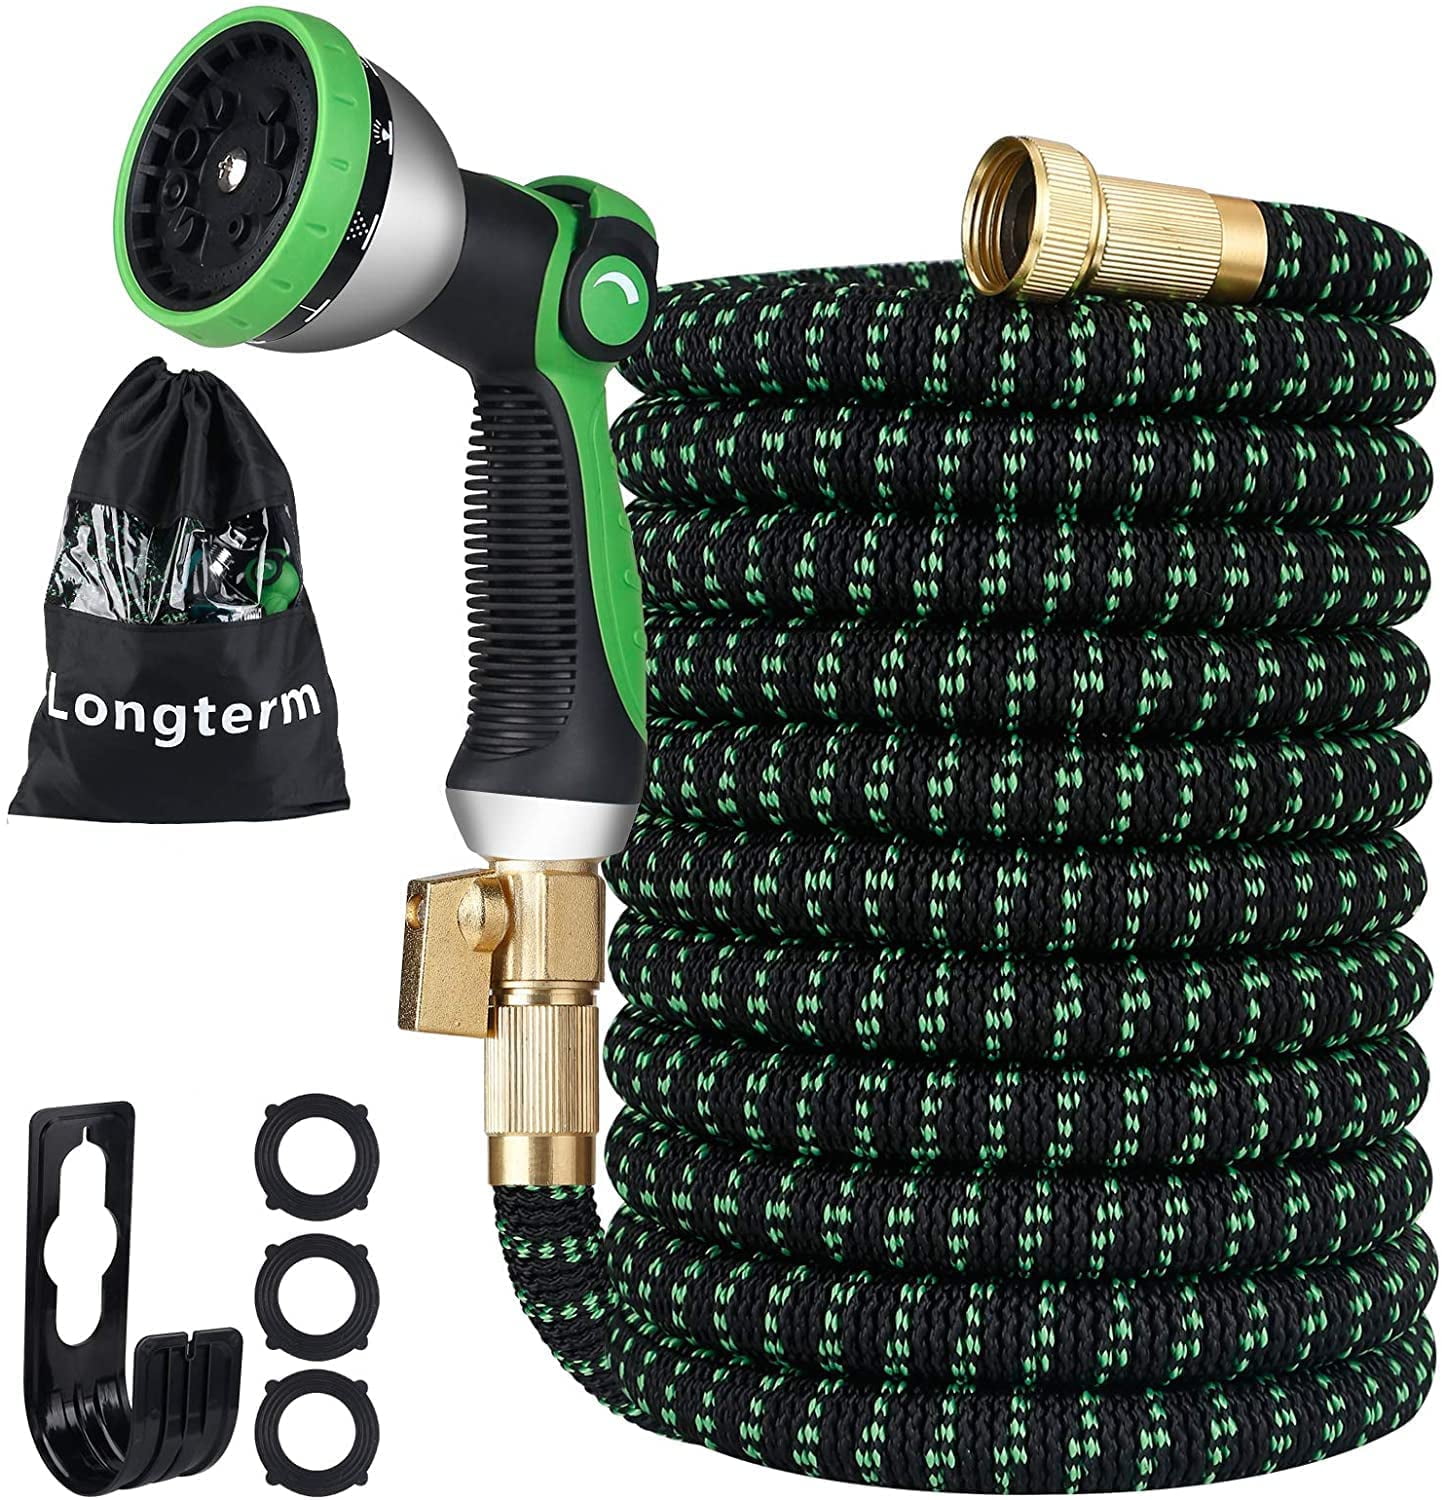 Storage Bag Holder 100ft Water Hose 3750D 4-Layer Latex Core with 3/4 Solid Brass Fittings Expandable Garden Hose with 10 Function Nozzle 